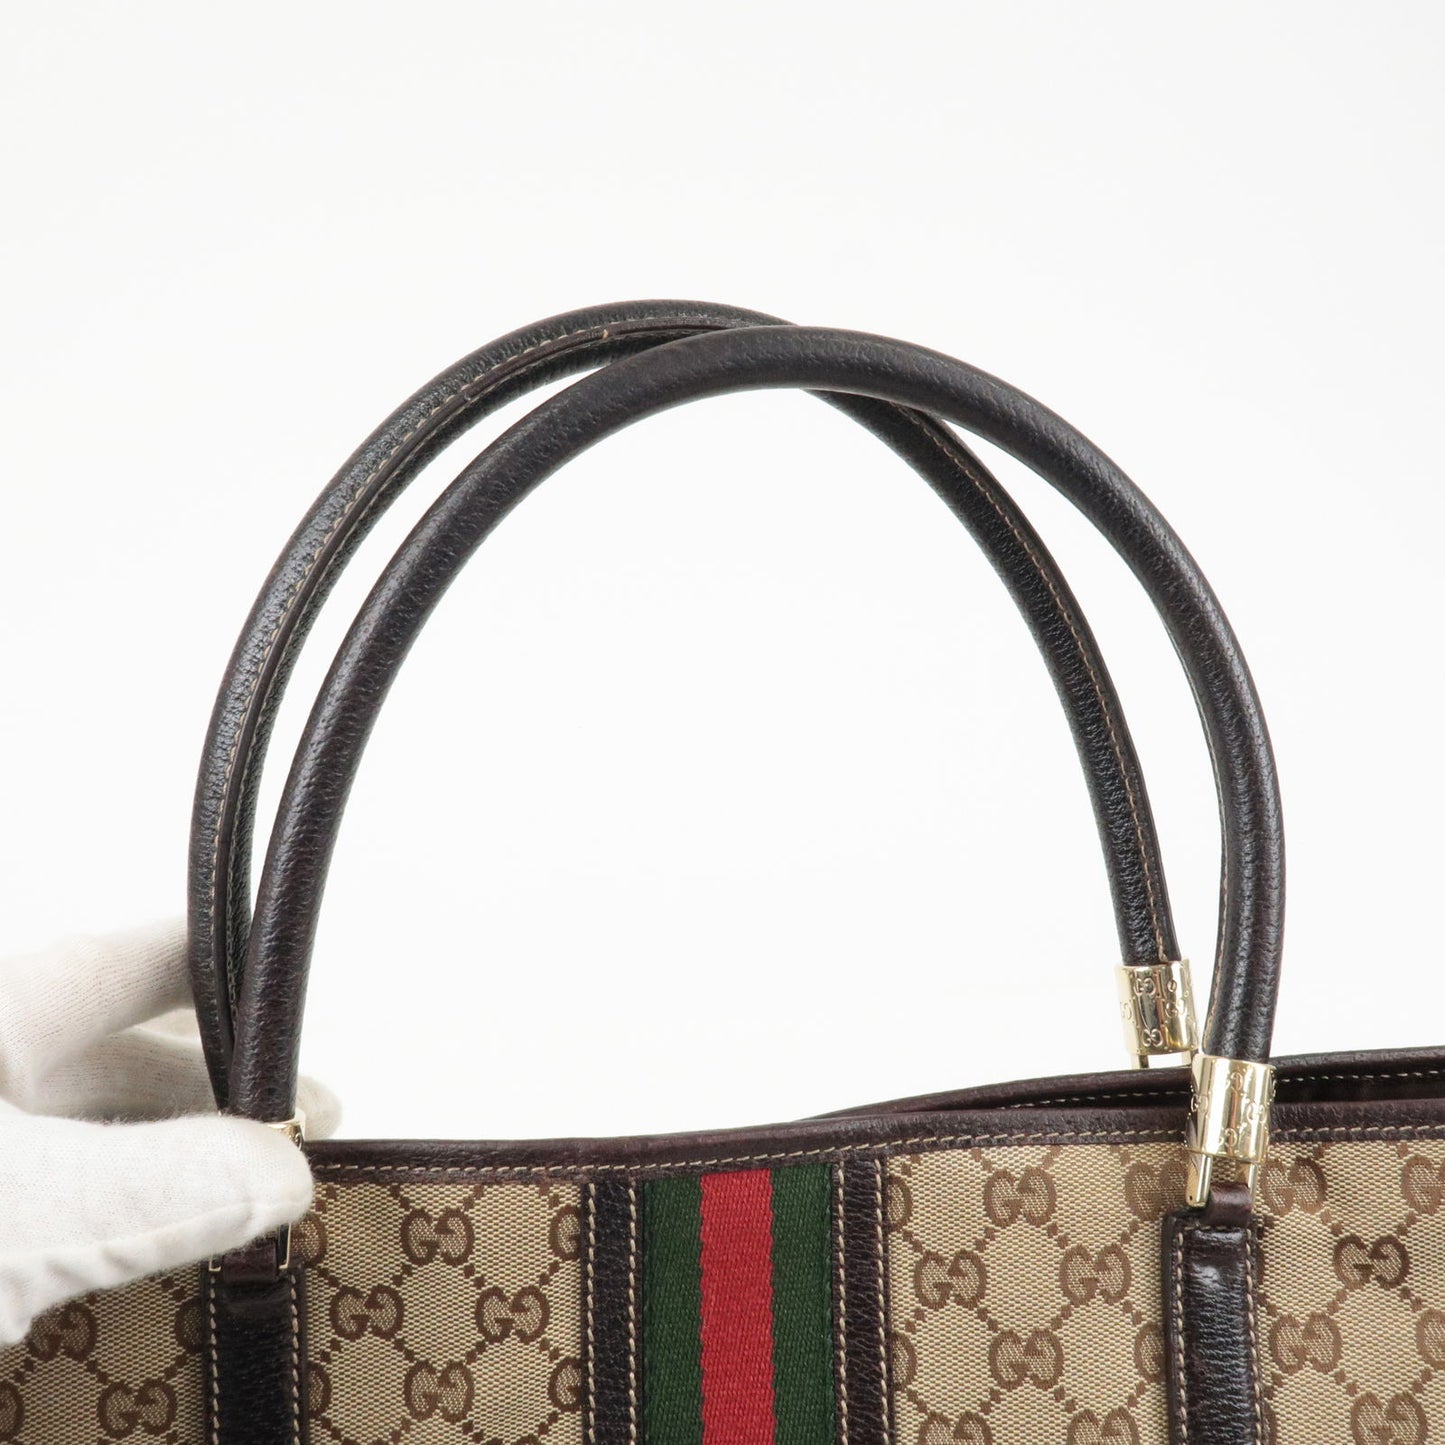 GUCCI Sherry GG Canvas Leather Tote Bag Beige Brown 161717